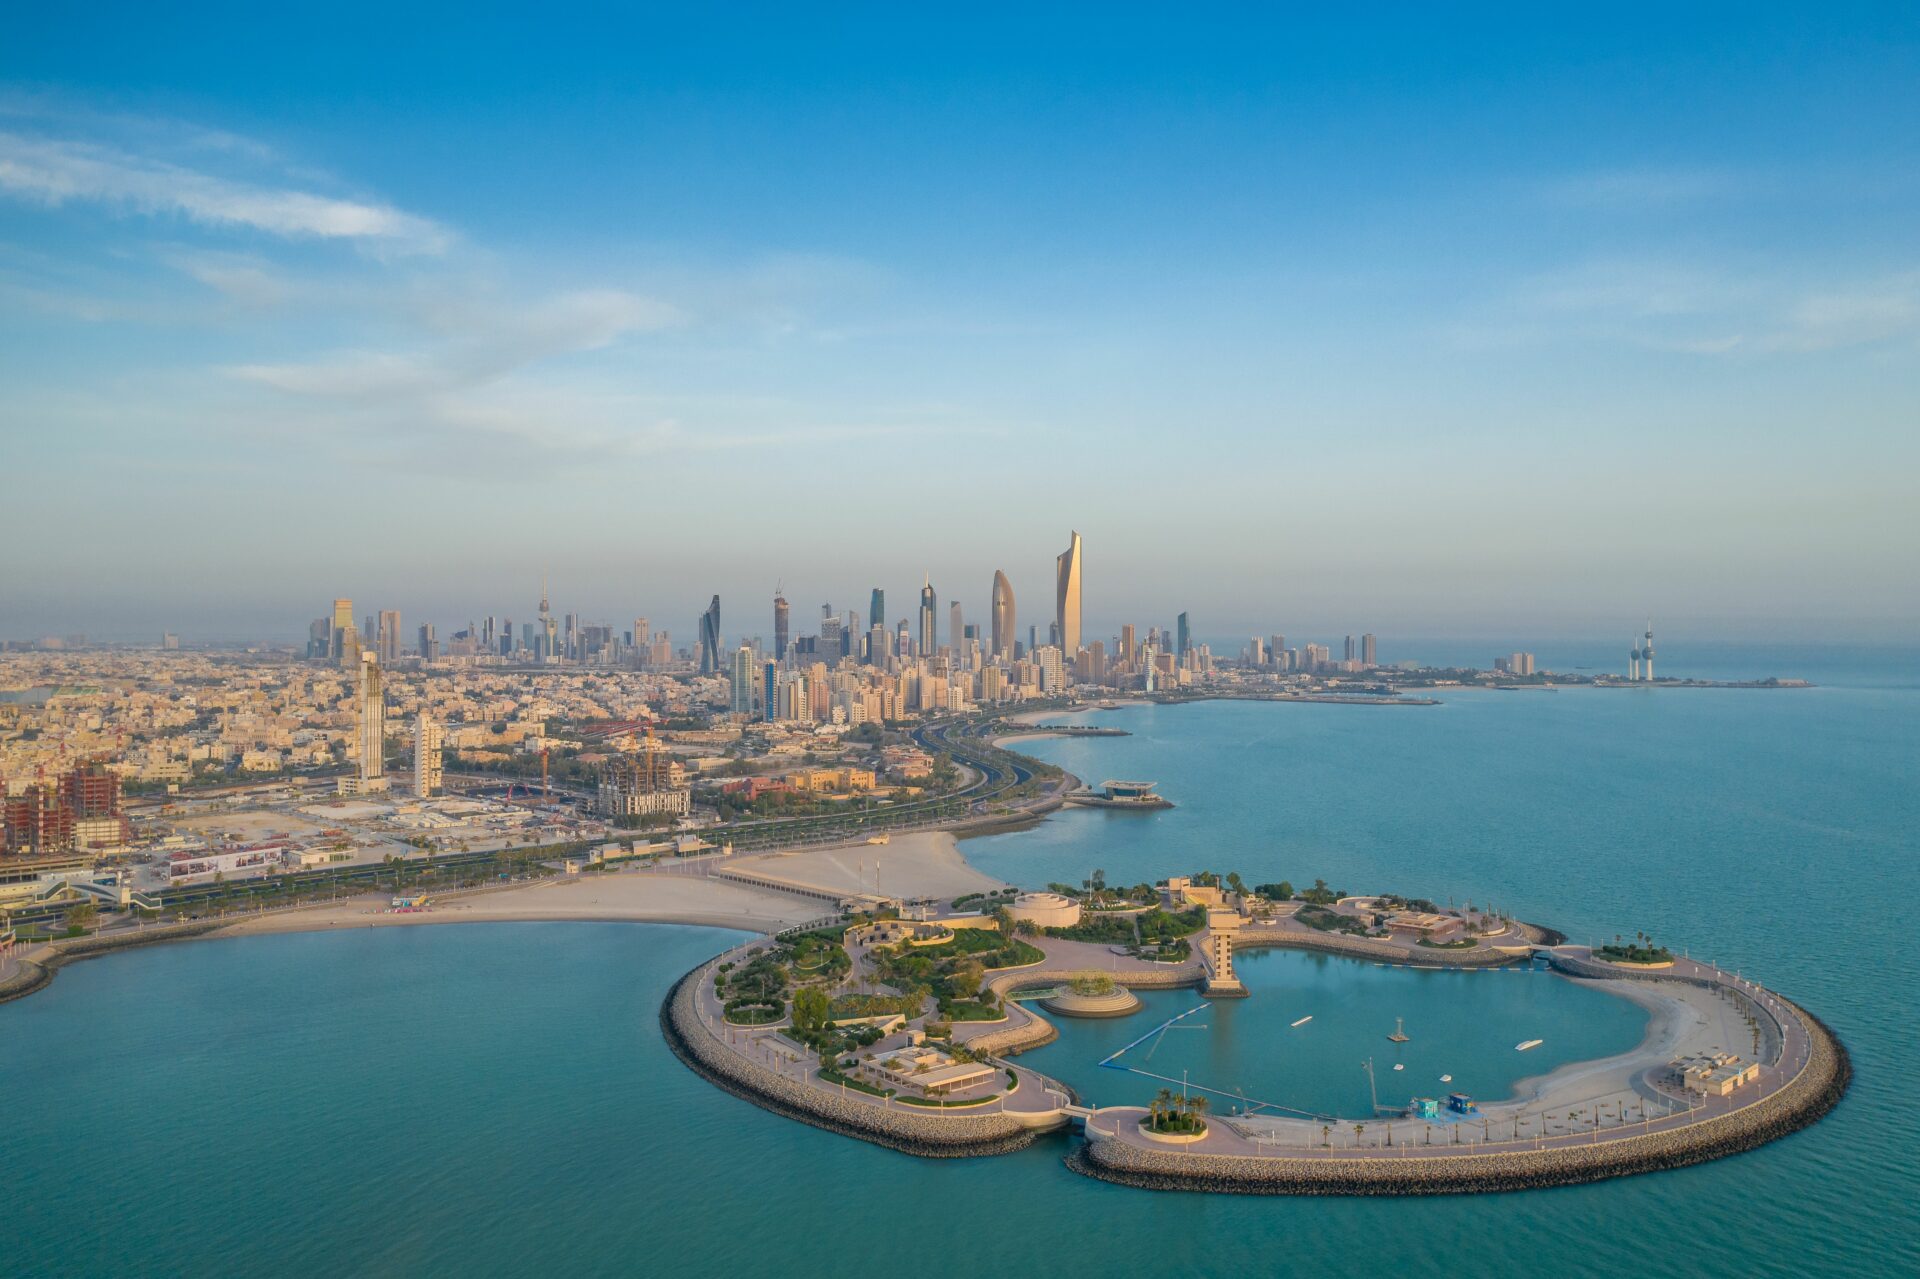 Immerse Yourself in a Serene Nature Getaway at the Top Beaches in Kuwait - Writtygritty